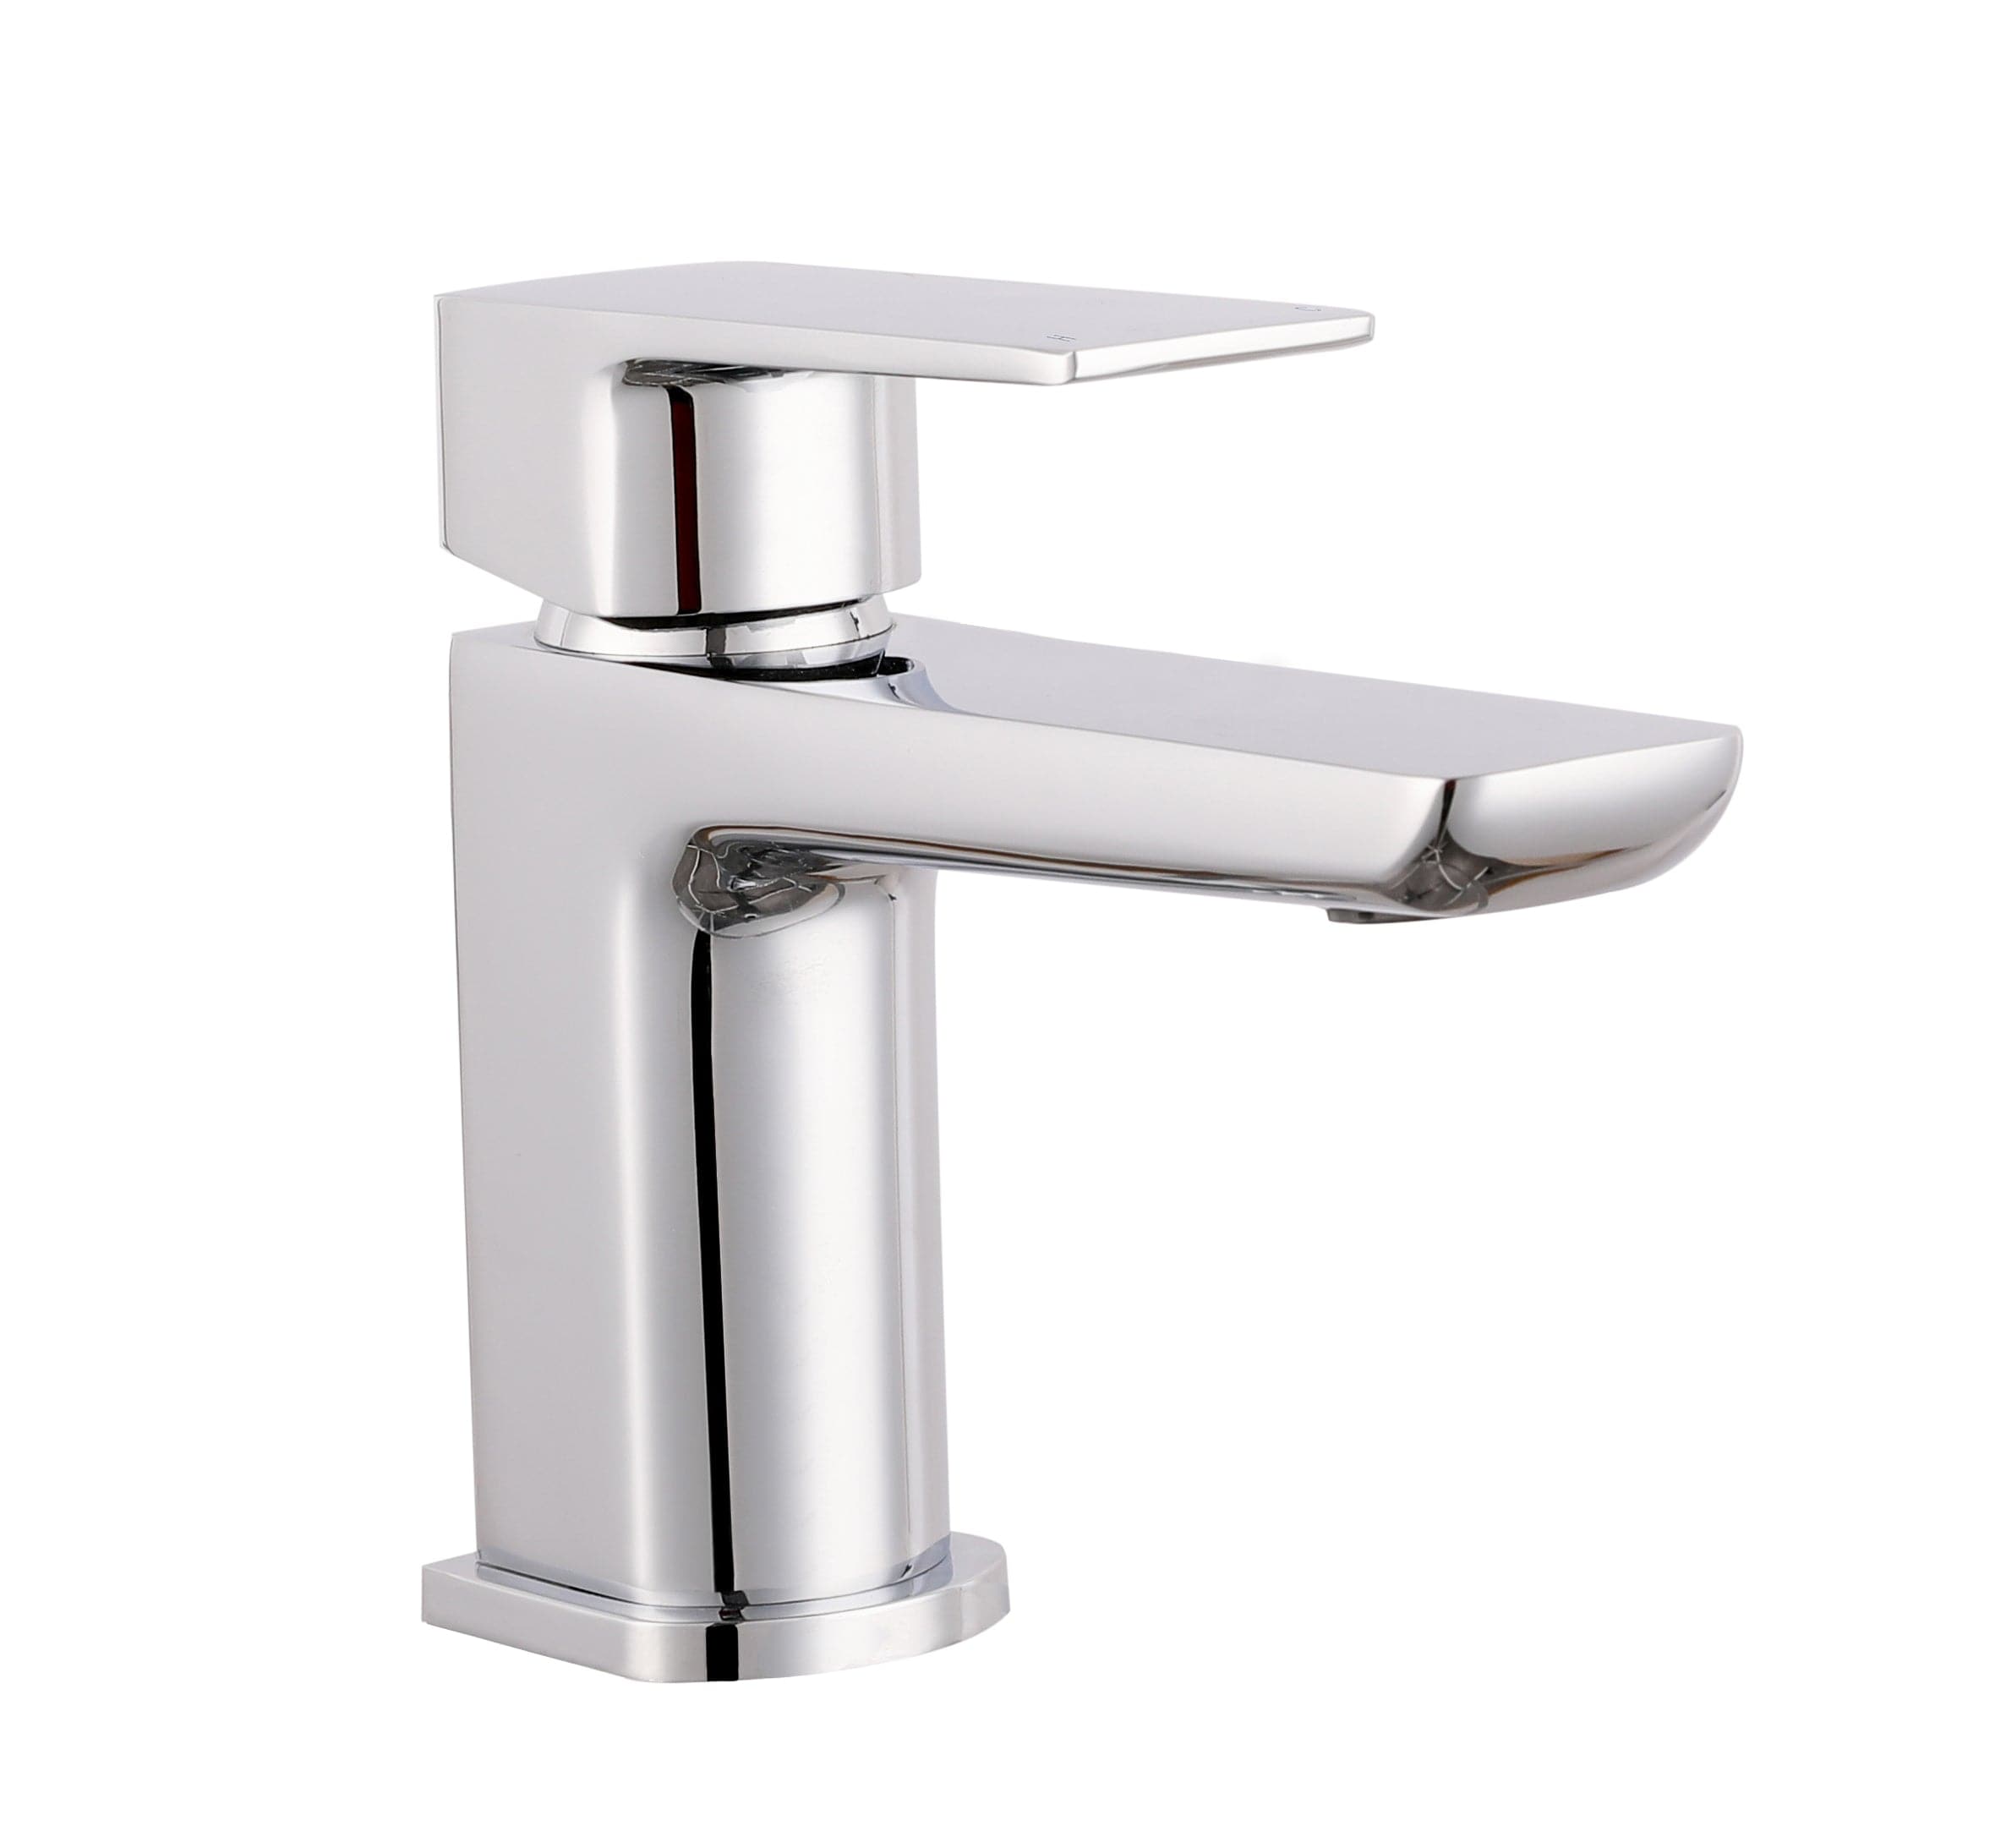 Chrome Lunar Soft Square Mono Basin Mixer Tap with Waste, modern design, bathroom fittings, UK.